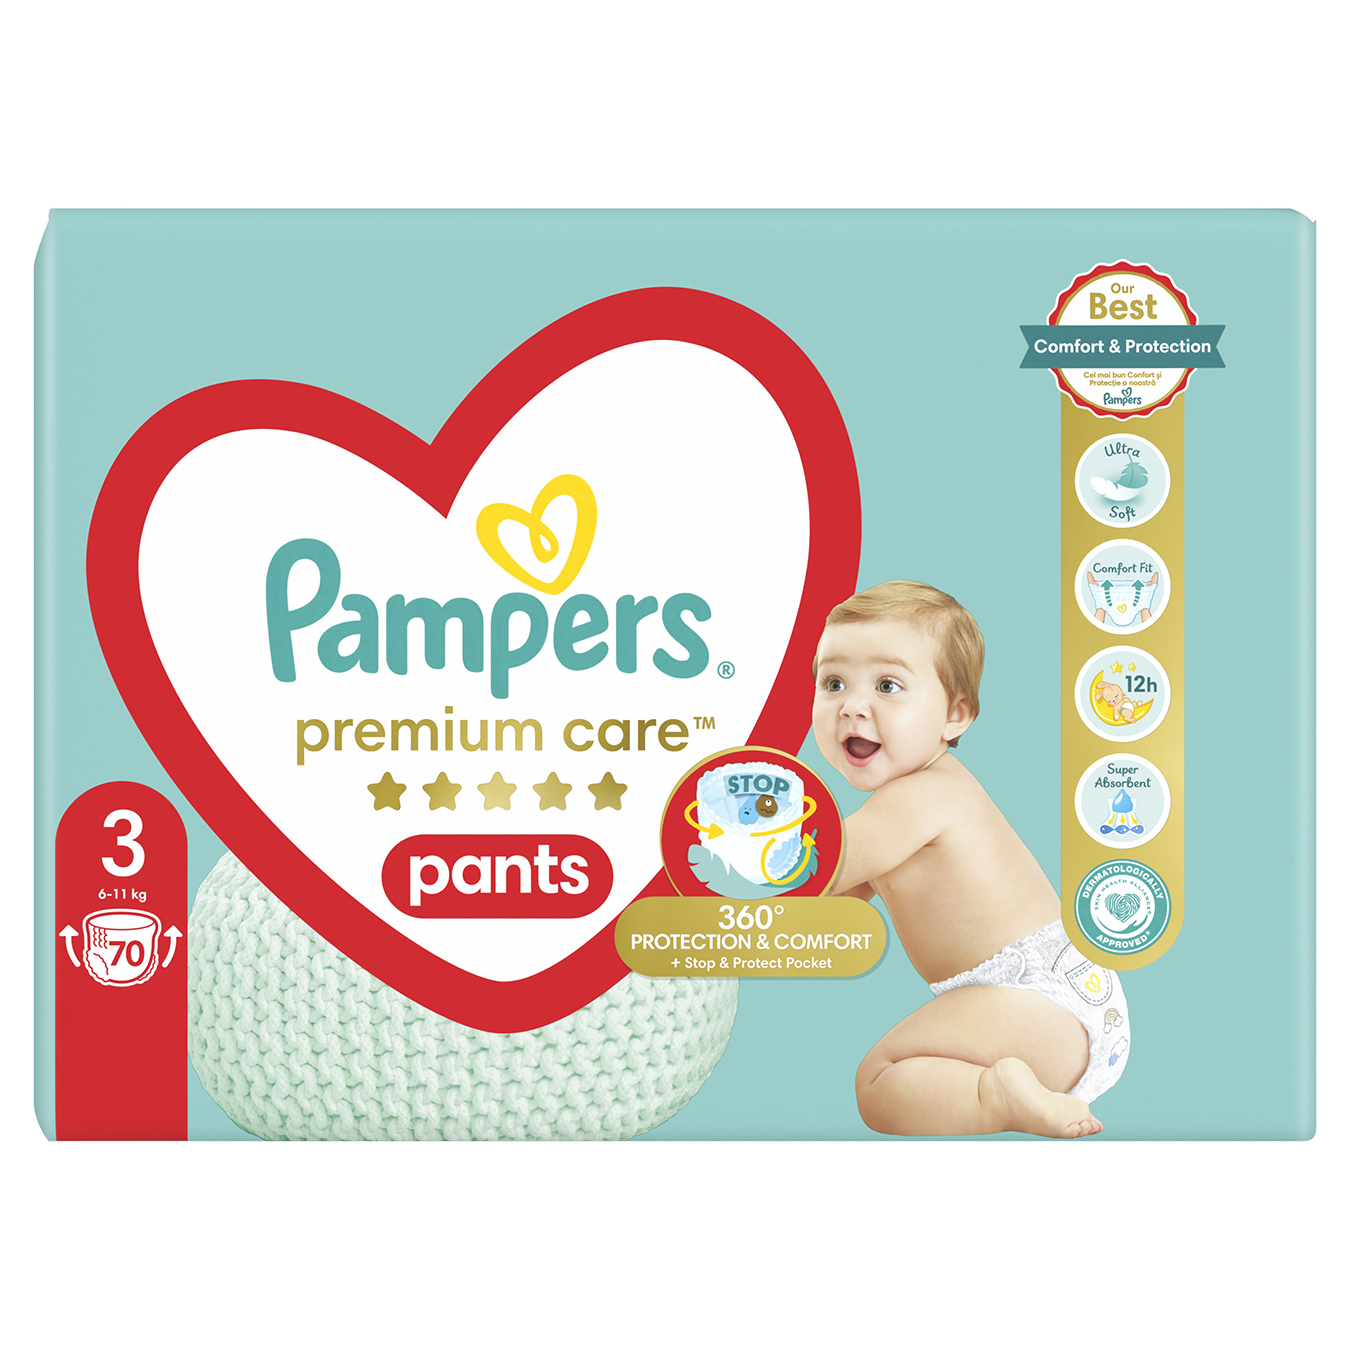 Pampers diapers-panties for children Premium 70 price Novus Pants a at pcs kg from Care ᐈ 6-11 Midi Buy good